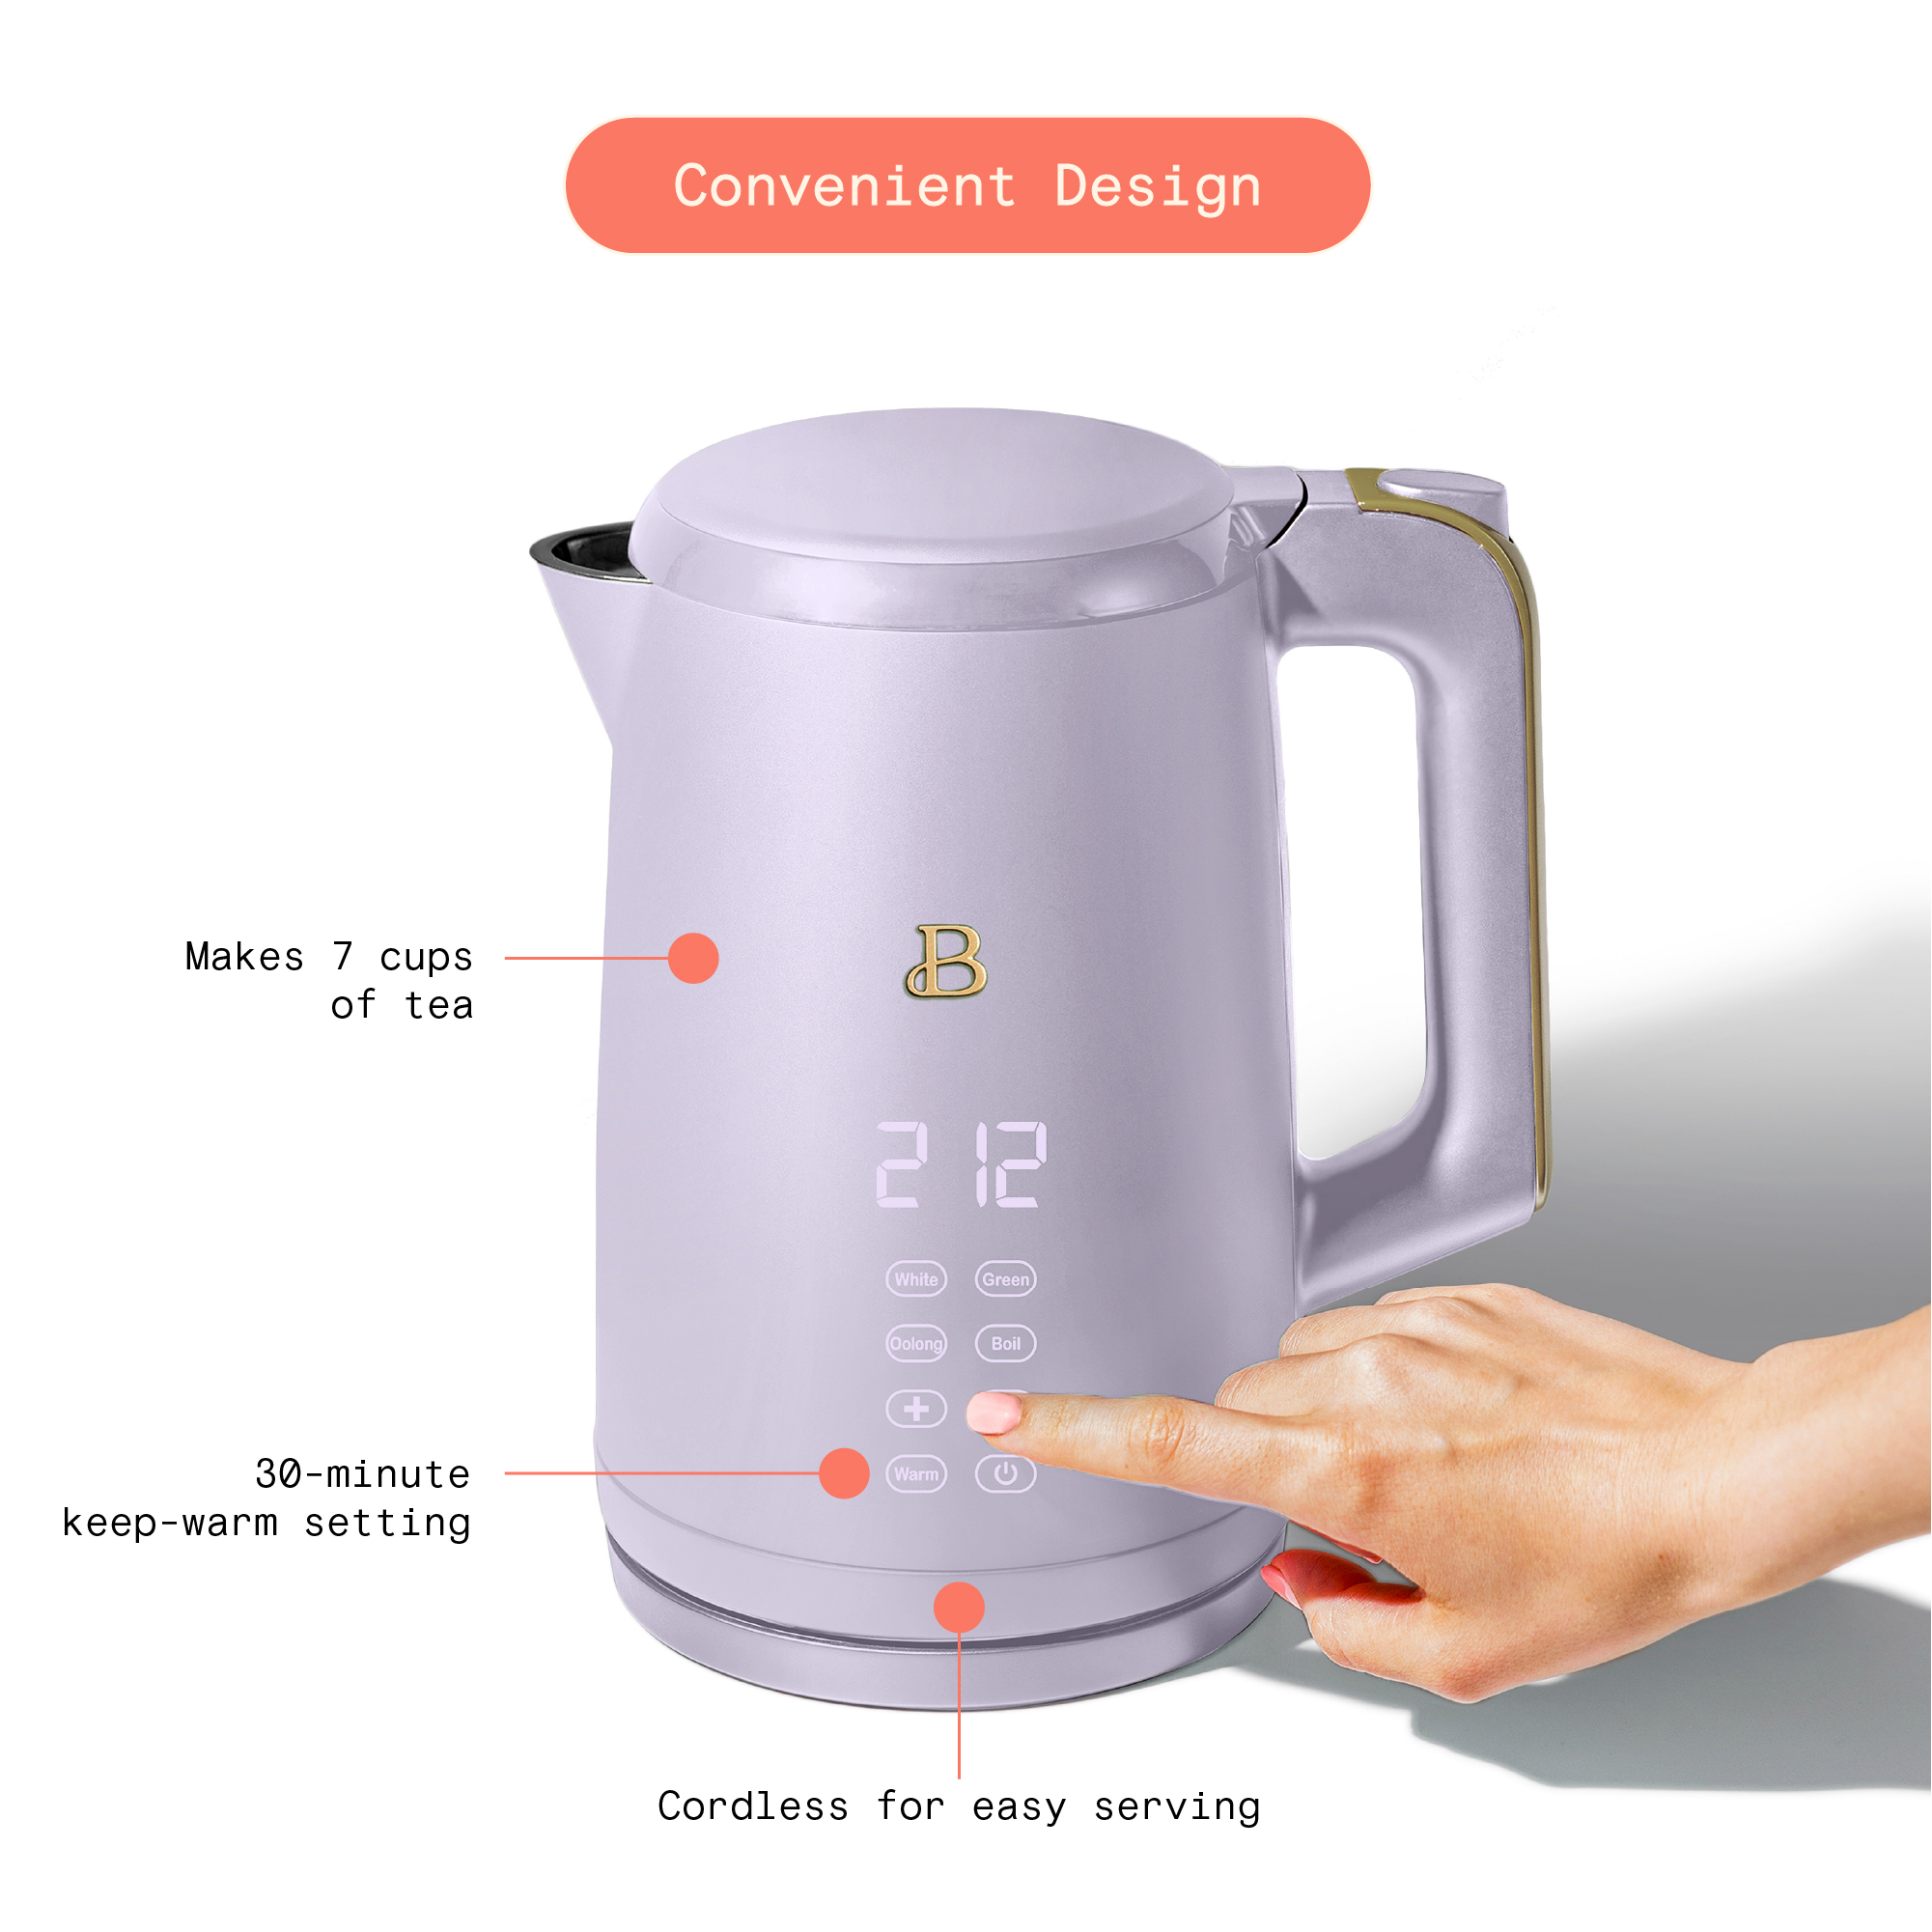 Beautiful 1.7-Liter Electric Kettle 1500 W with One-Touch Activation, Lavender by Drew Barrymore - image 5 of 6